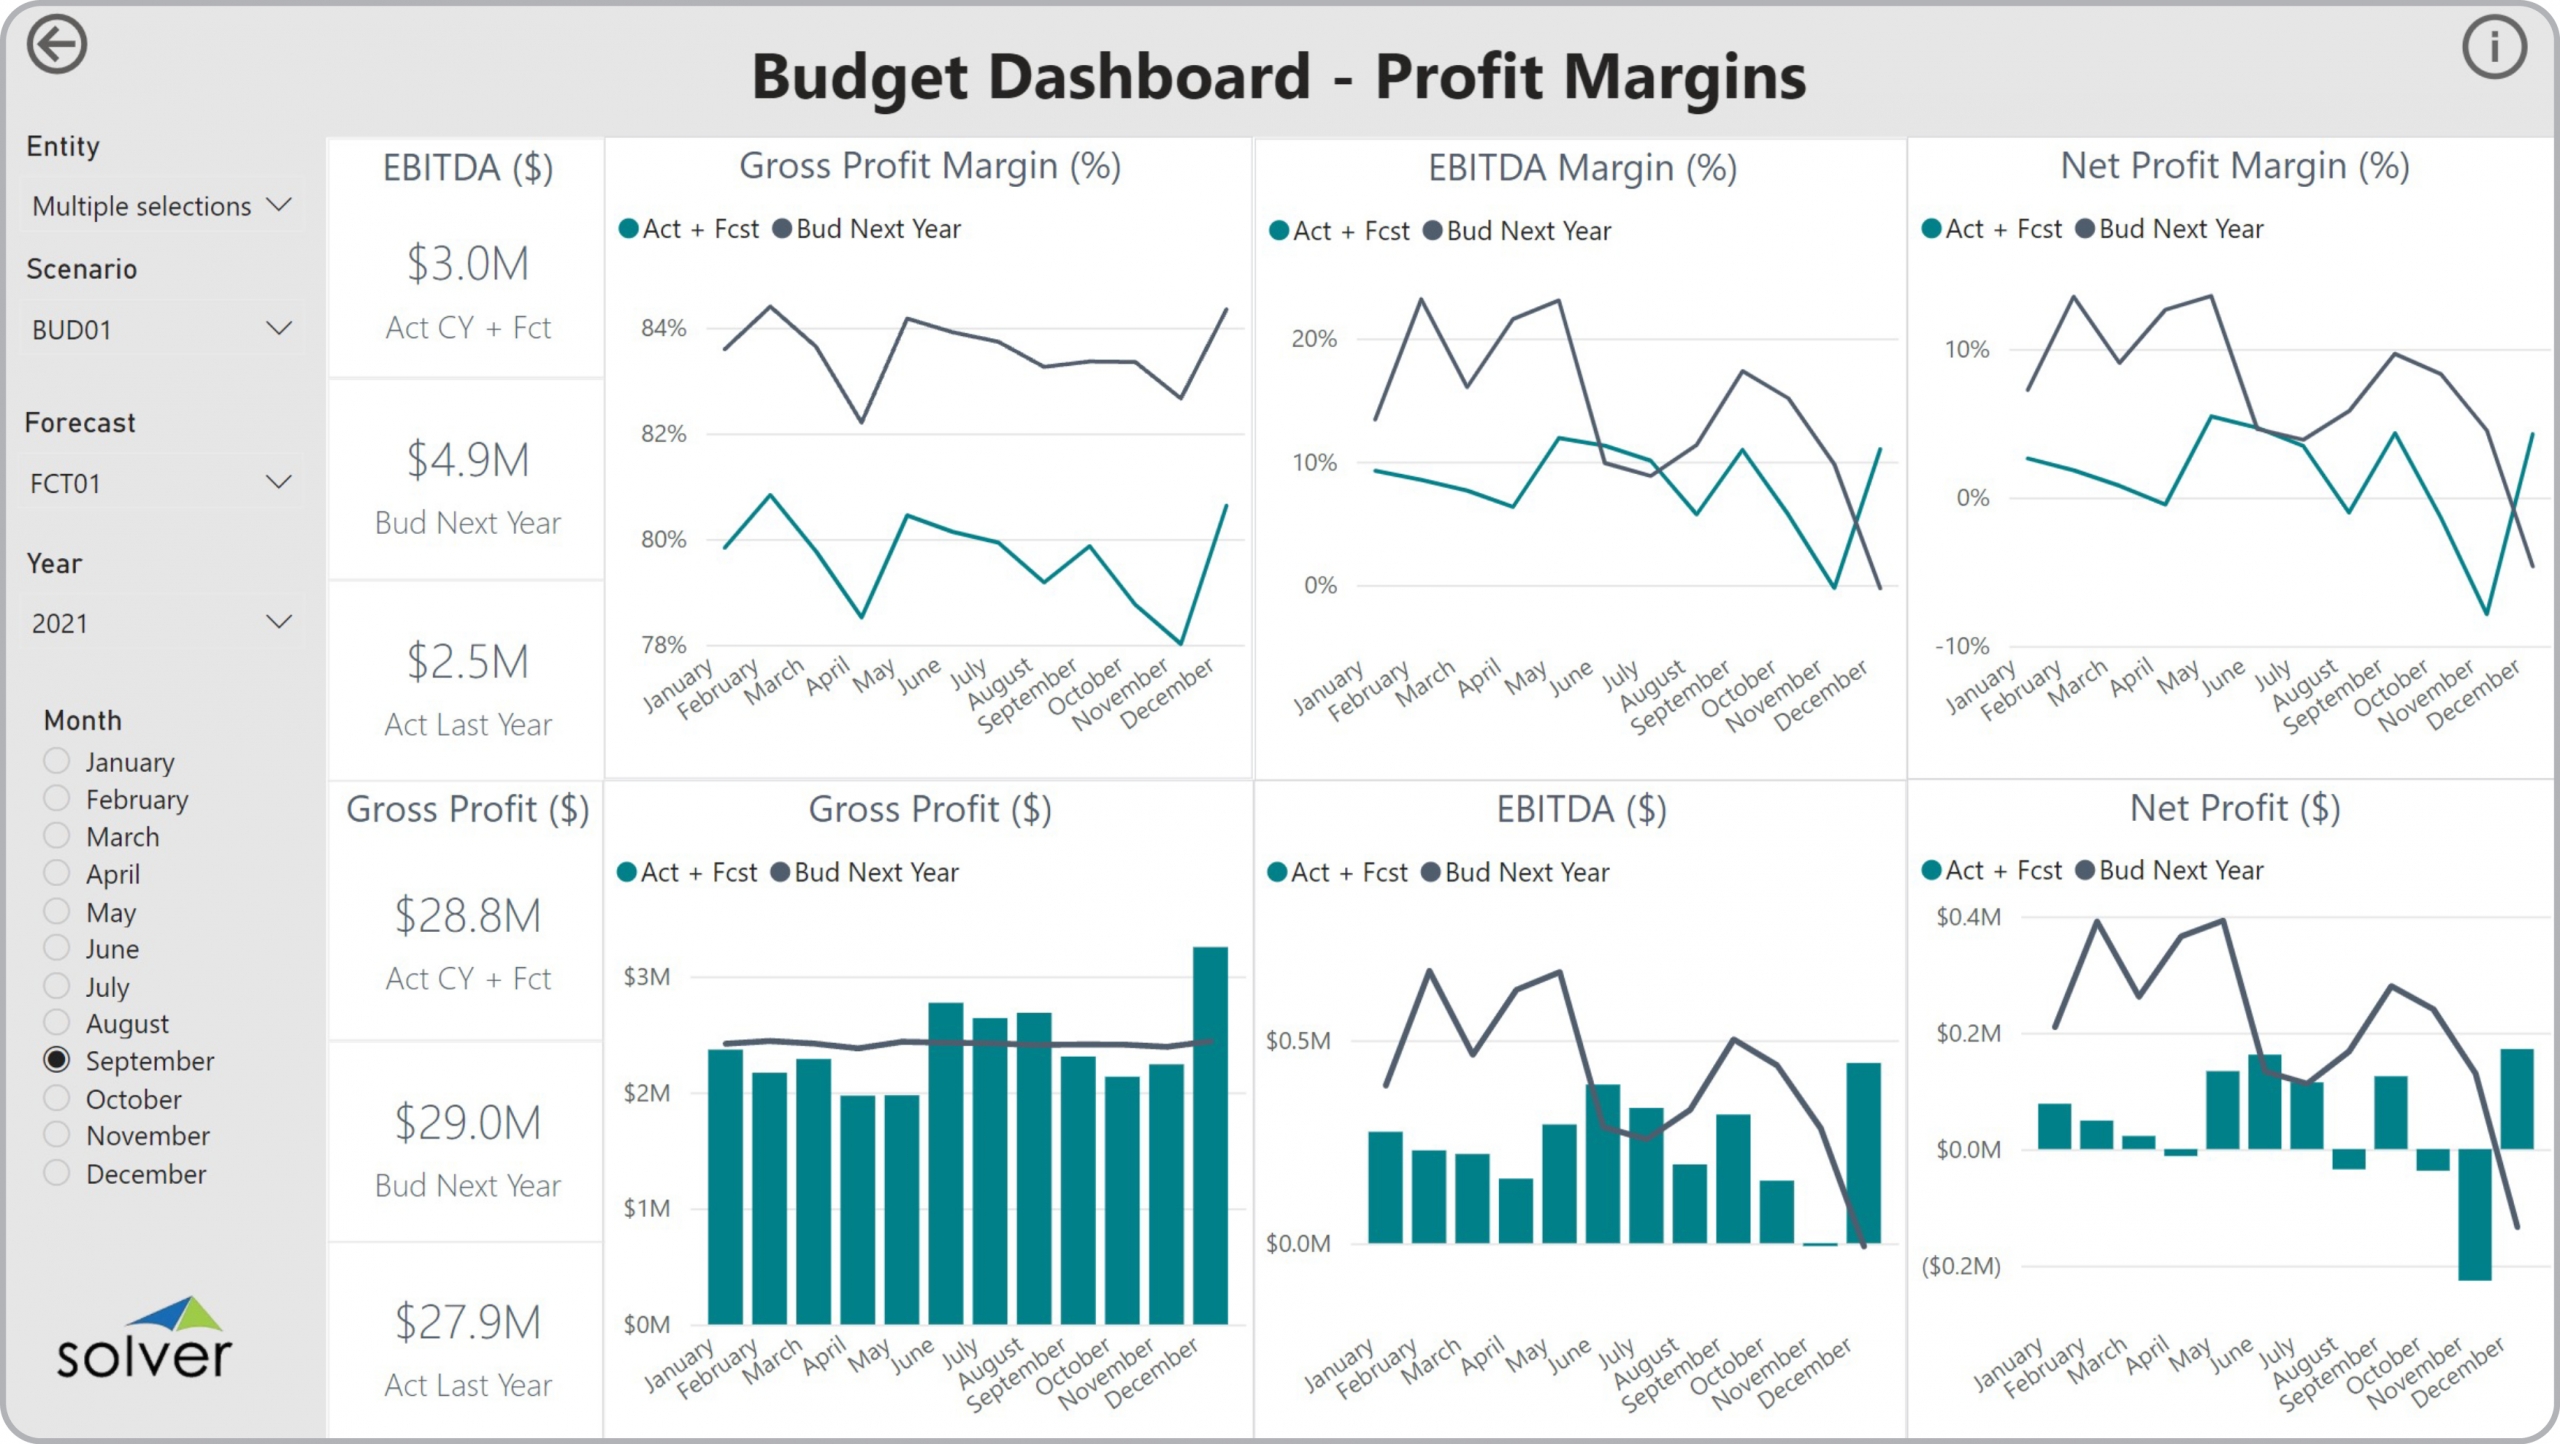 Example of a Profit Margin Budget Dashboard to Streamline the Planning Process